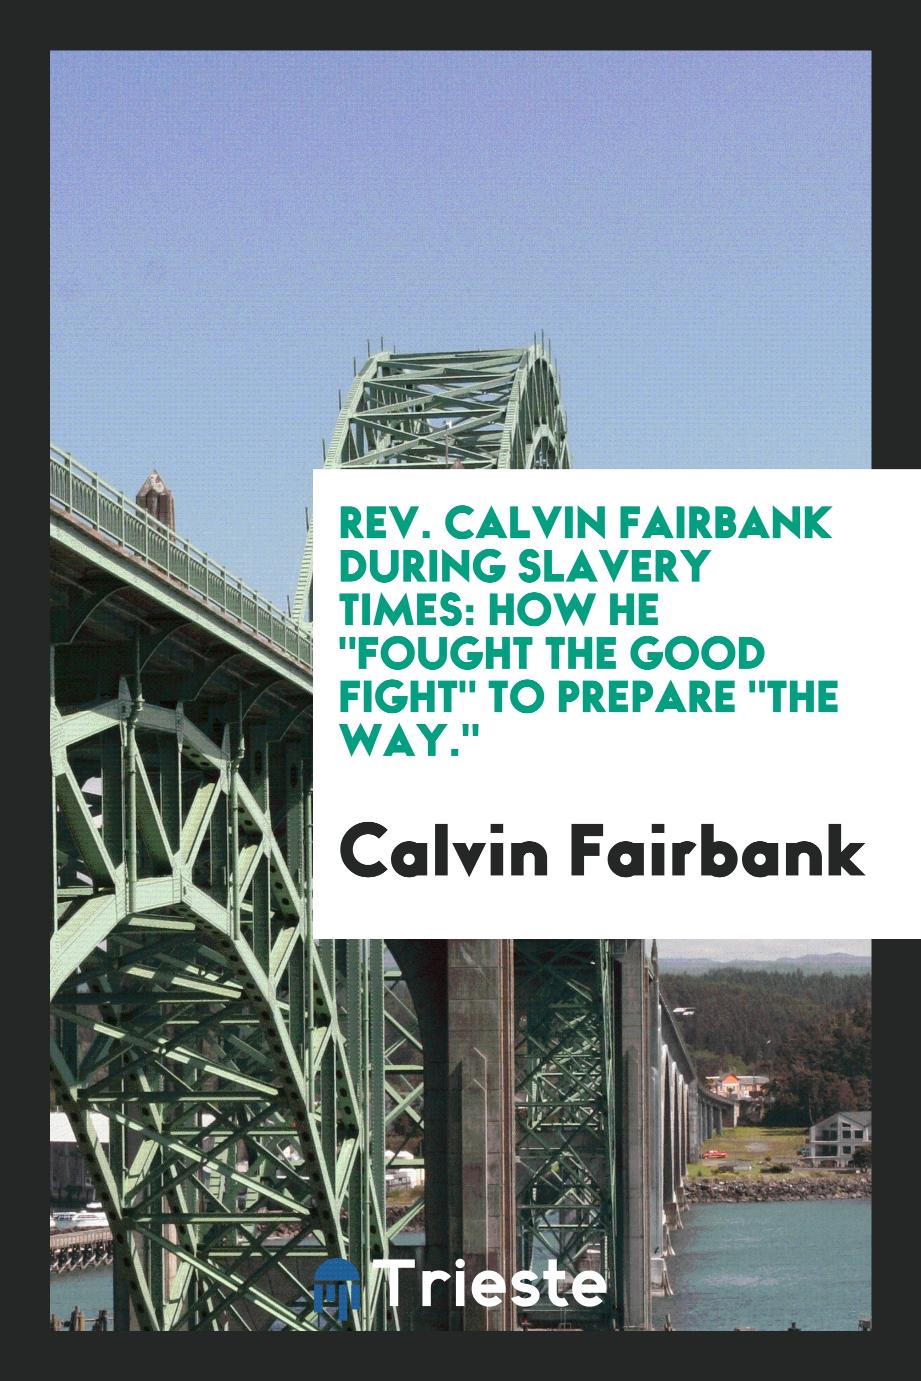 Rev. Calvin Fairbank during slavery times: how he "fought the good fight" to prepare "the way."